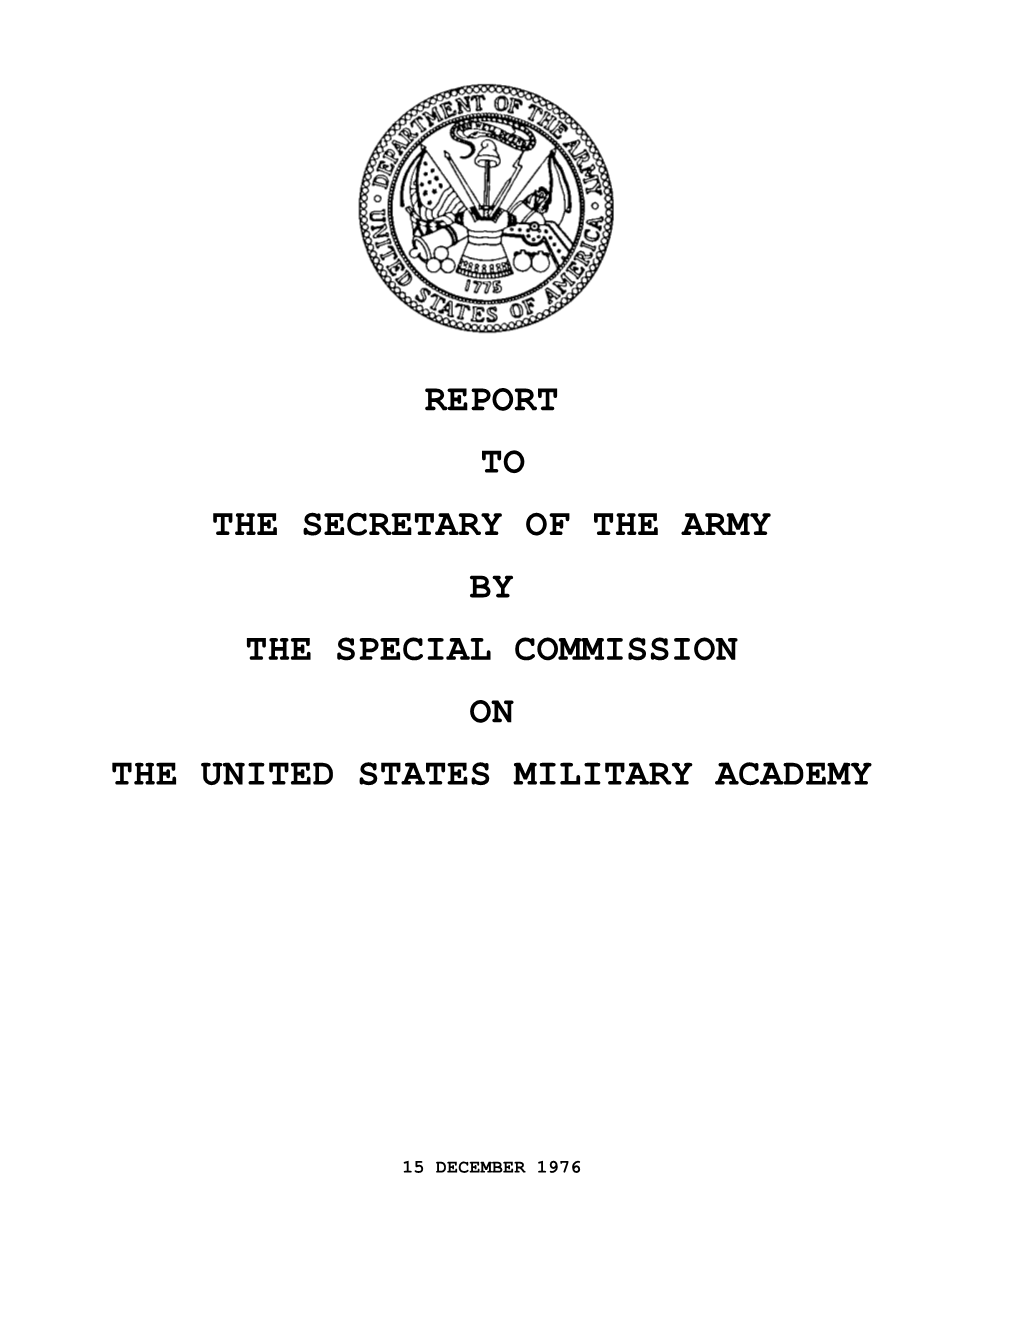 Report to the Secretary of the Army by the Special Commission on the United States Military Academy